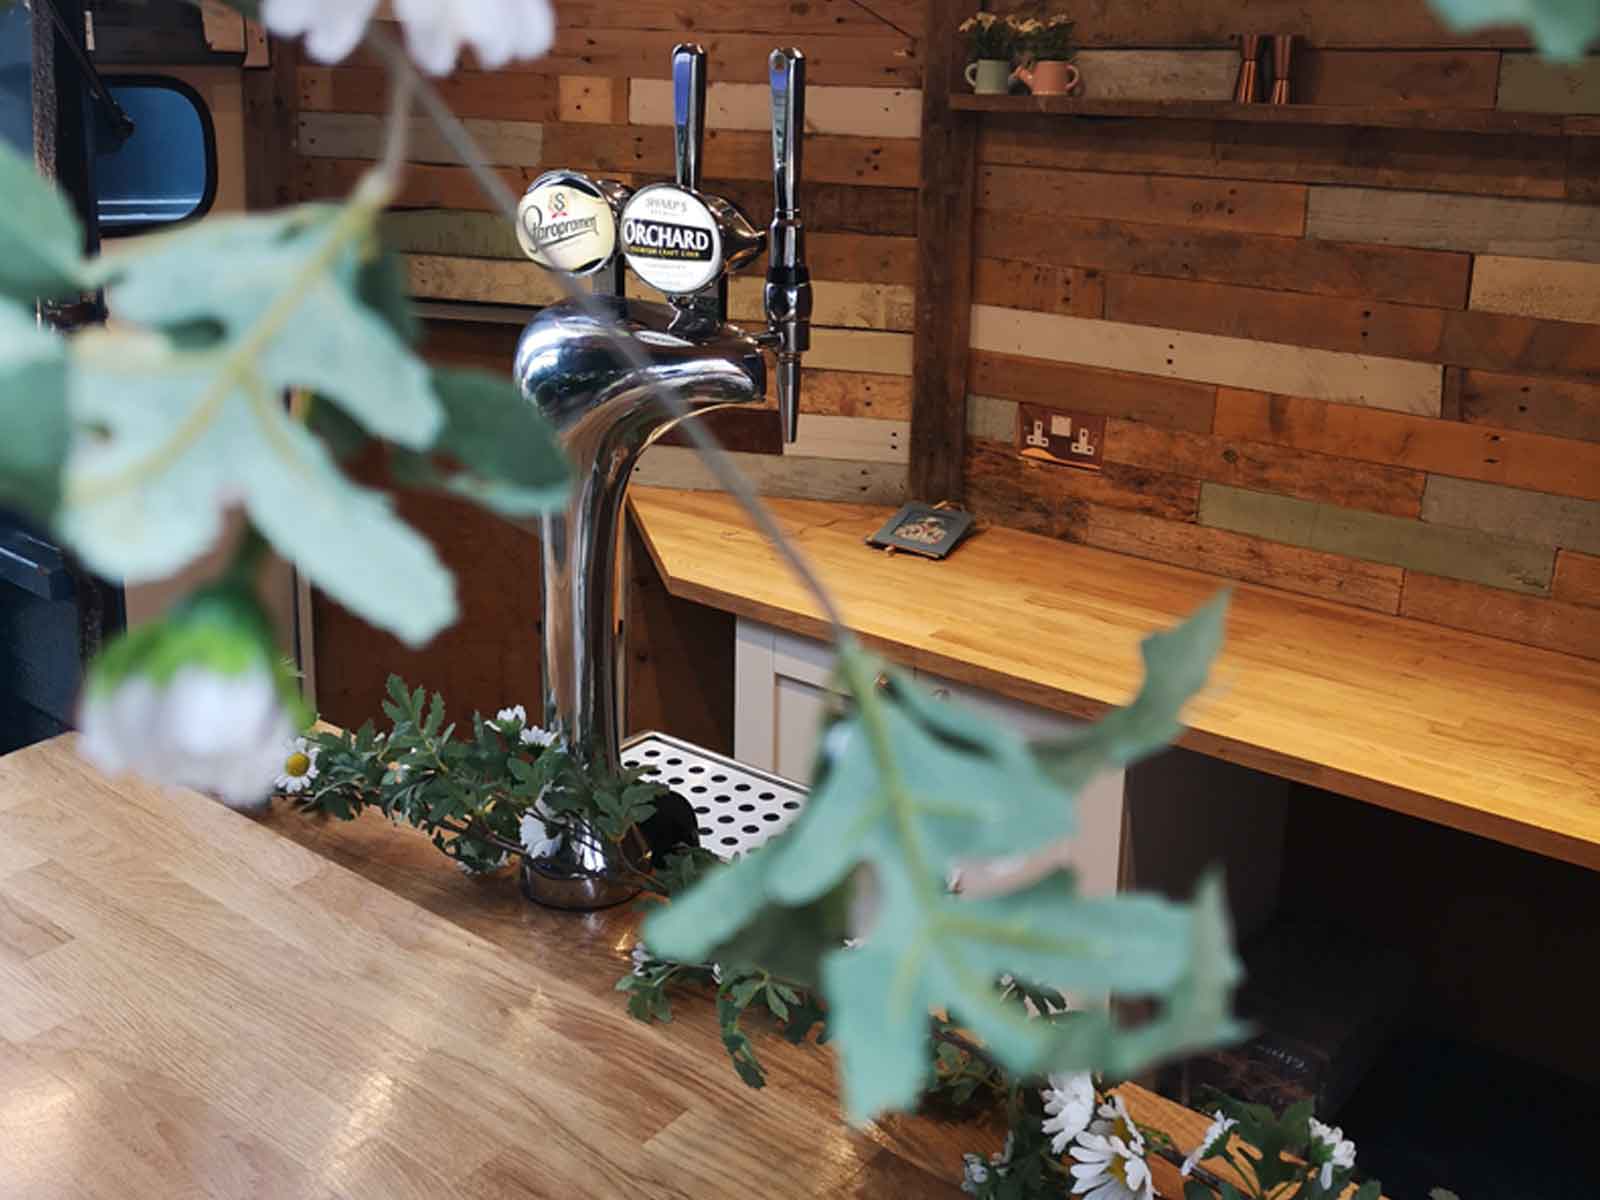 A close up view inside The Brew Box mobile bar, showing a beer pump, wooden work surfaces and floral decorations